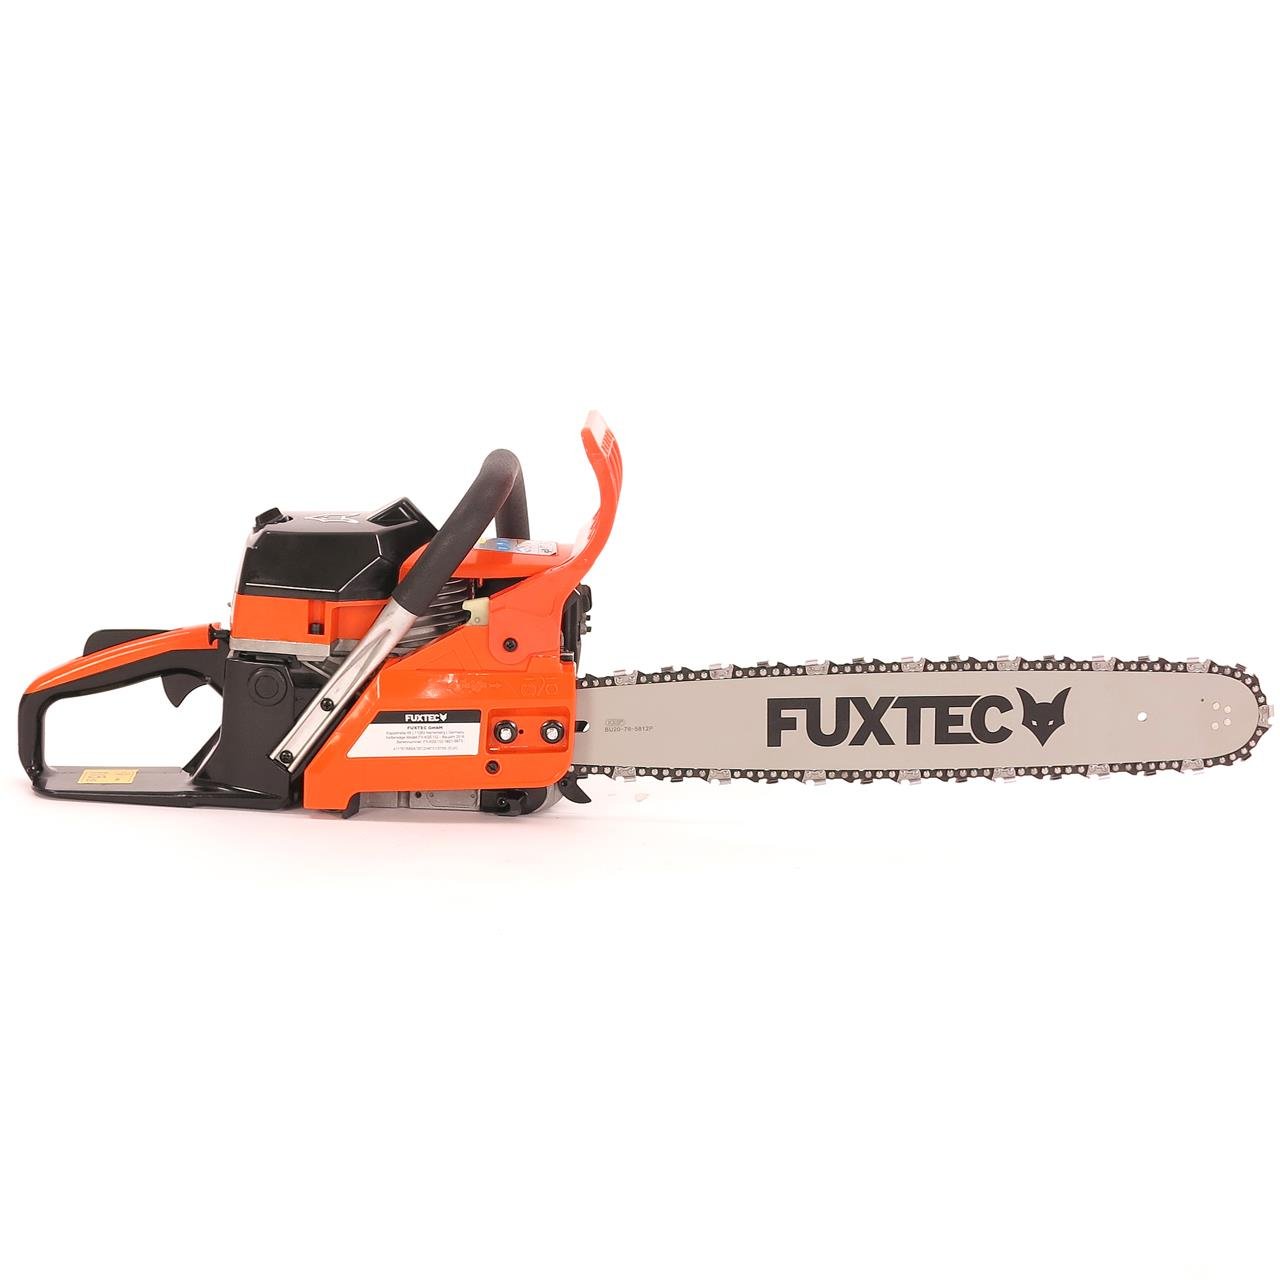 FUXTEC blade protection for multi-tools